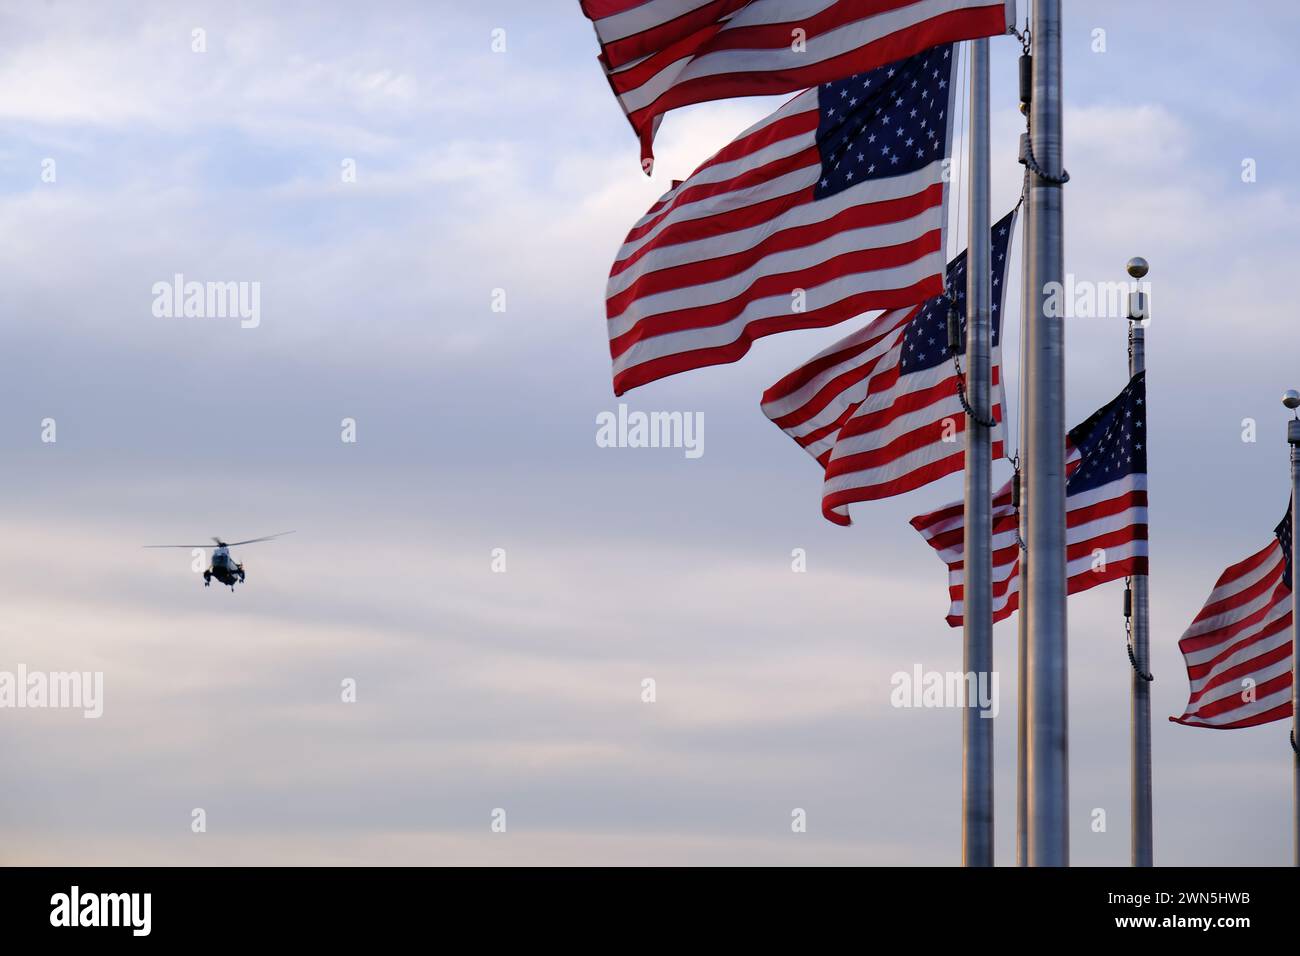 Marine One the helicopter carrying the president of United States flying over National Mall with US flags in foreground.Washington DC.USA Stock Photo